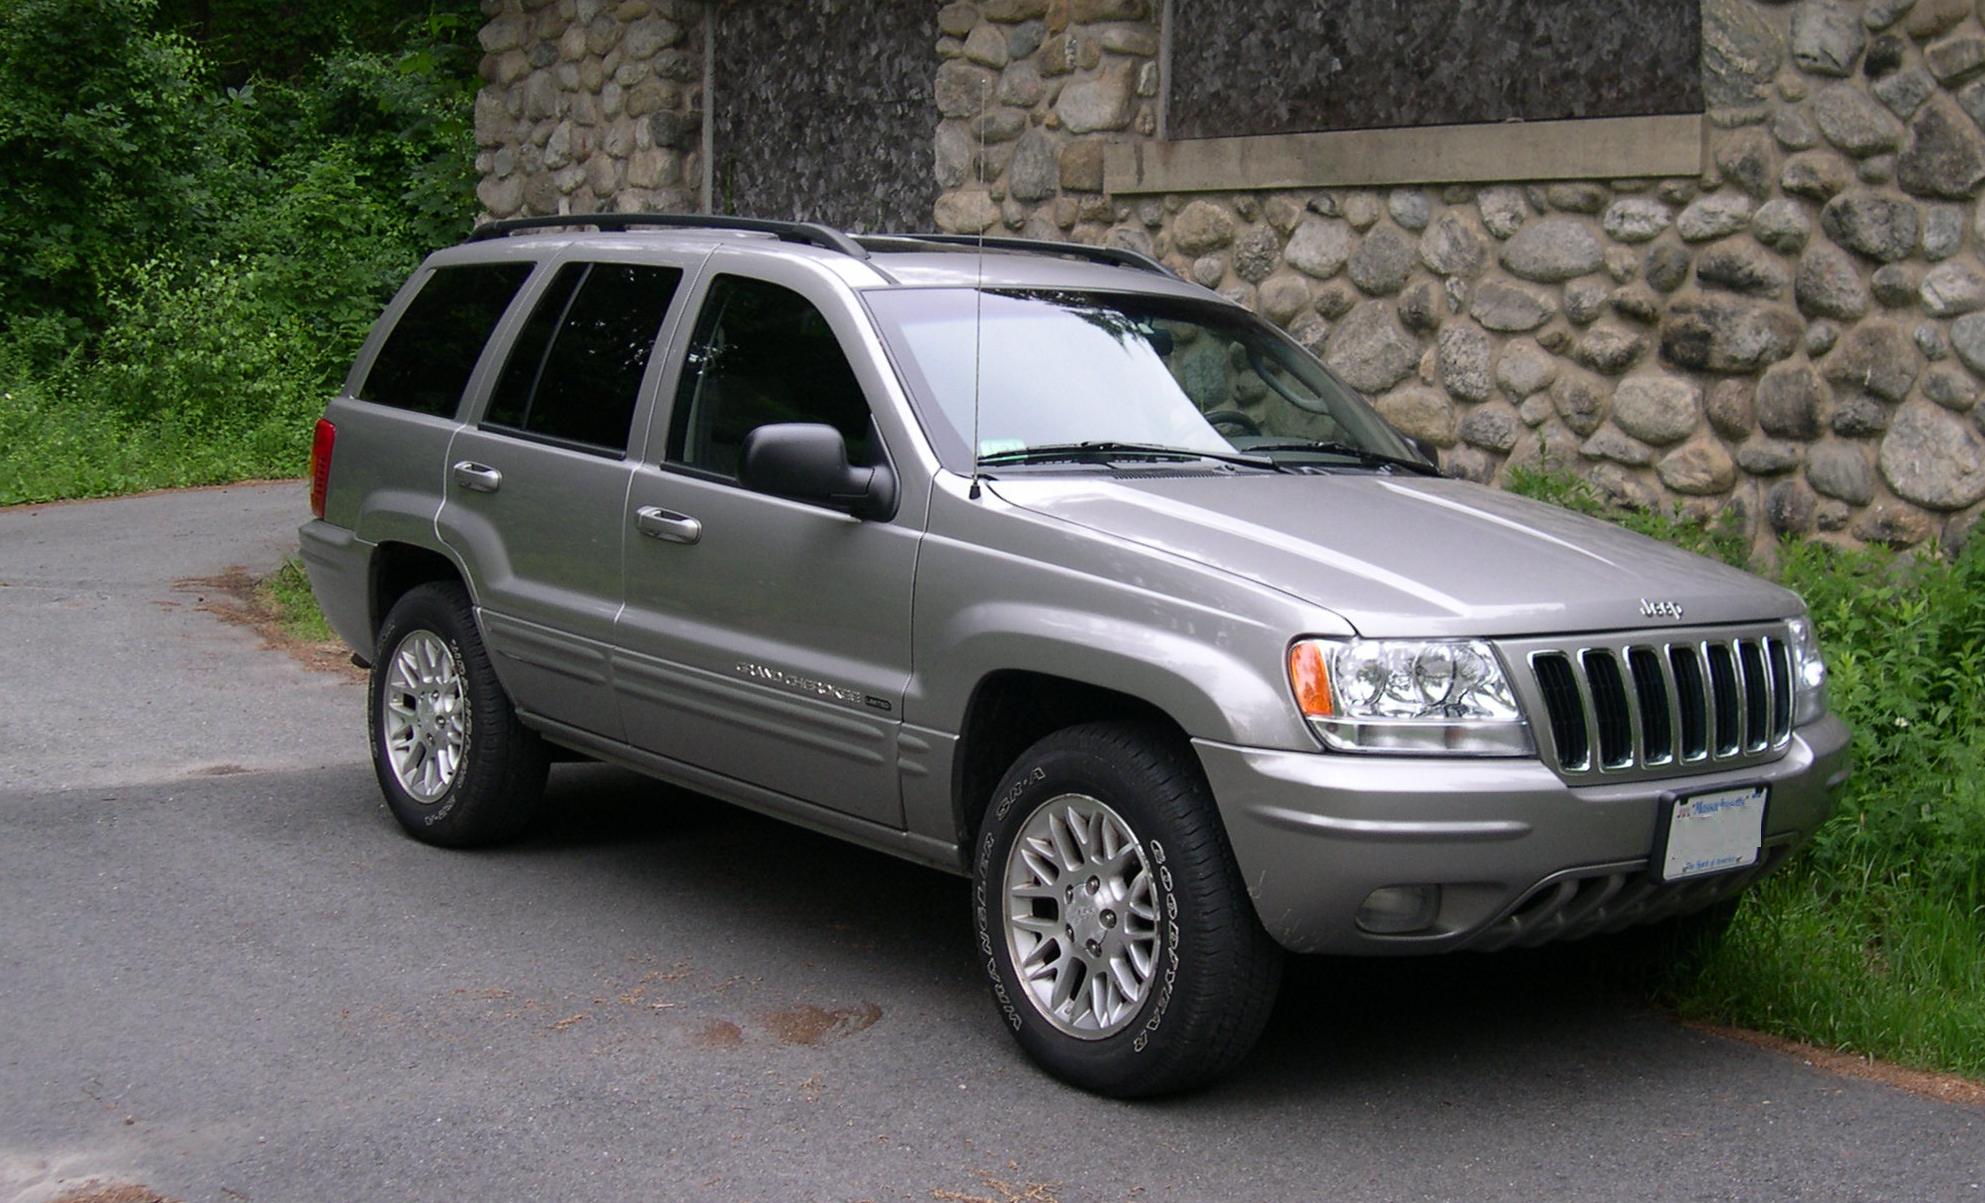 Jeep Grand Cherokee WJ technical details, history, photos